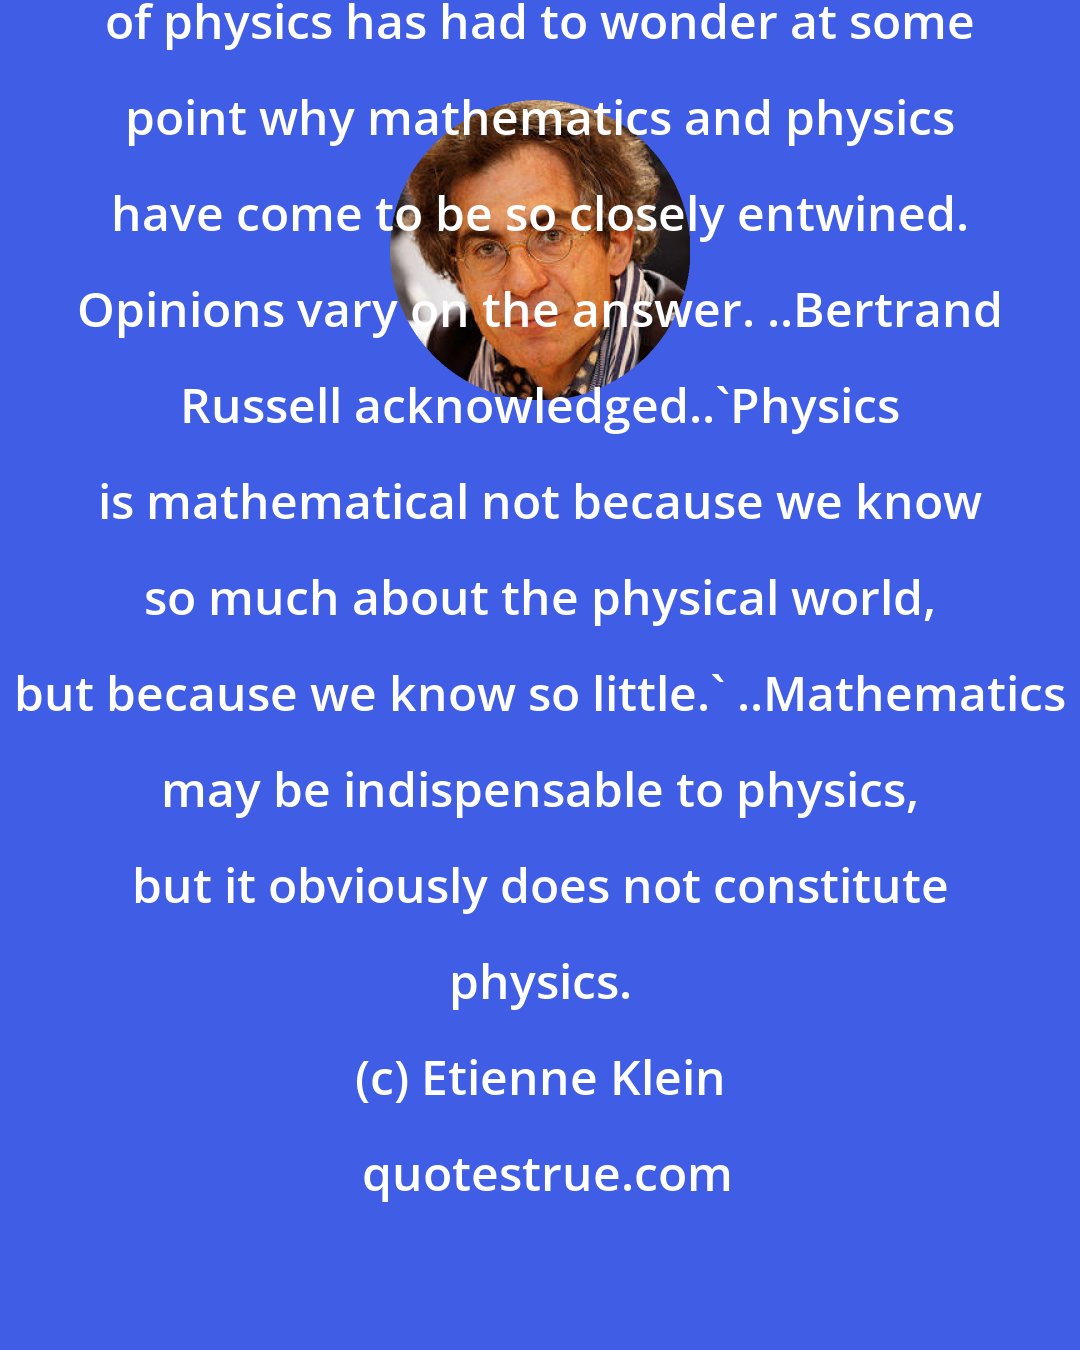 Etienne Klein: It seems that every practitioner of physics has had to wonder at some point why mathematics and physics have come to be so closely entwined. Opinions vary on the answer. ..Bertrand Russell acknowledged..'Physics is mathematical not because we know so much about the physical world, but because we know so little.' ..Mathematics may be indispensable to physics, but it obviously does not constitute physics.